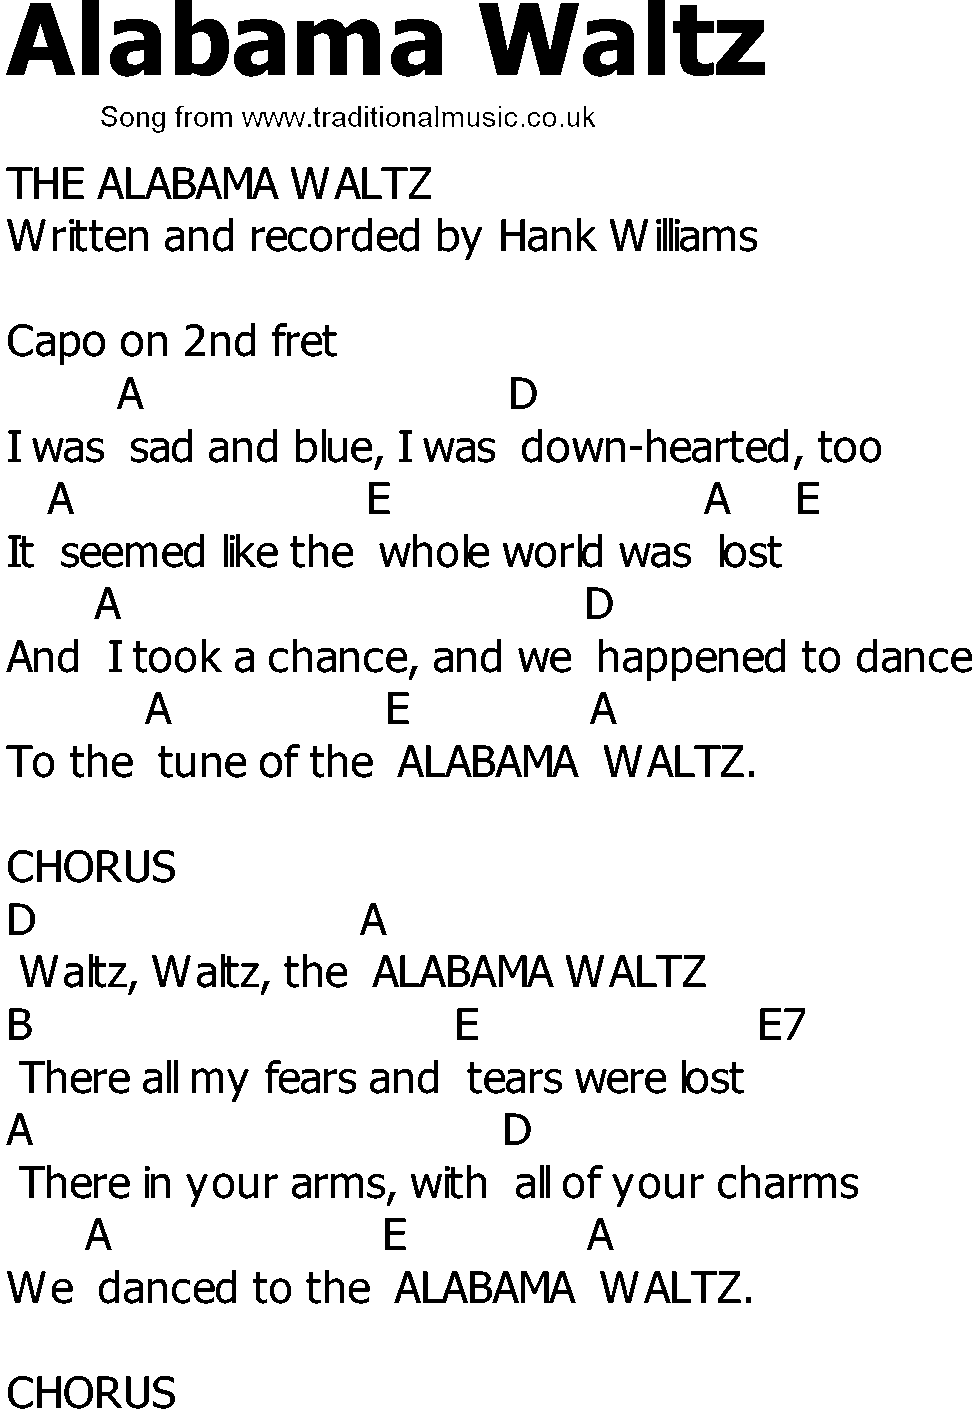 Old Country song lyrics with chords - Alabama Waltz